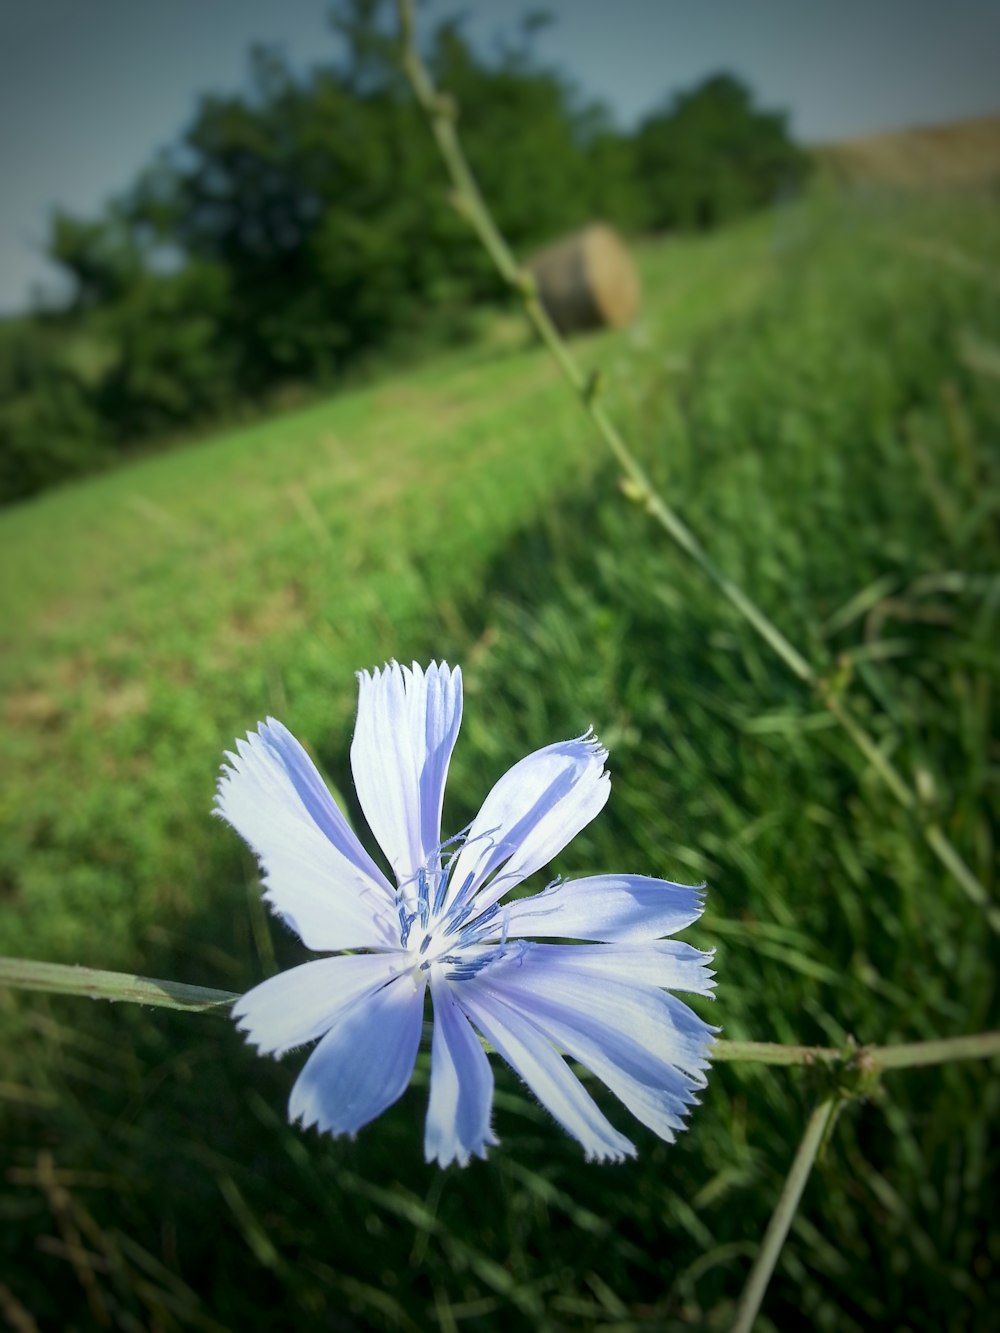 a blue flower in the middle of a grassy field